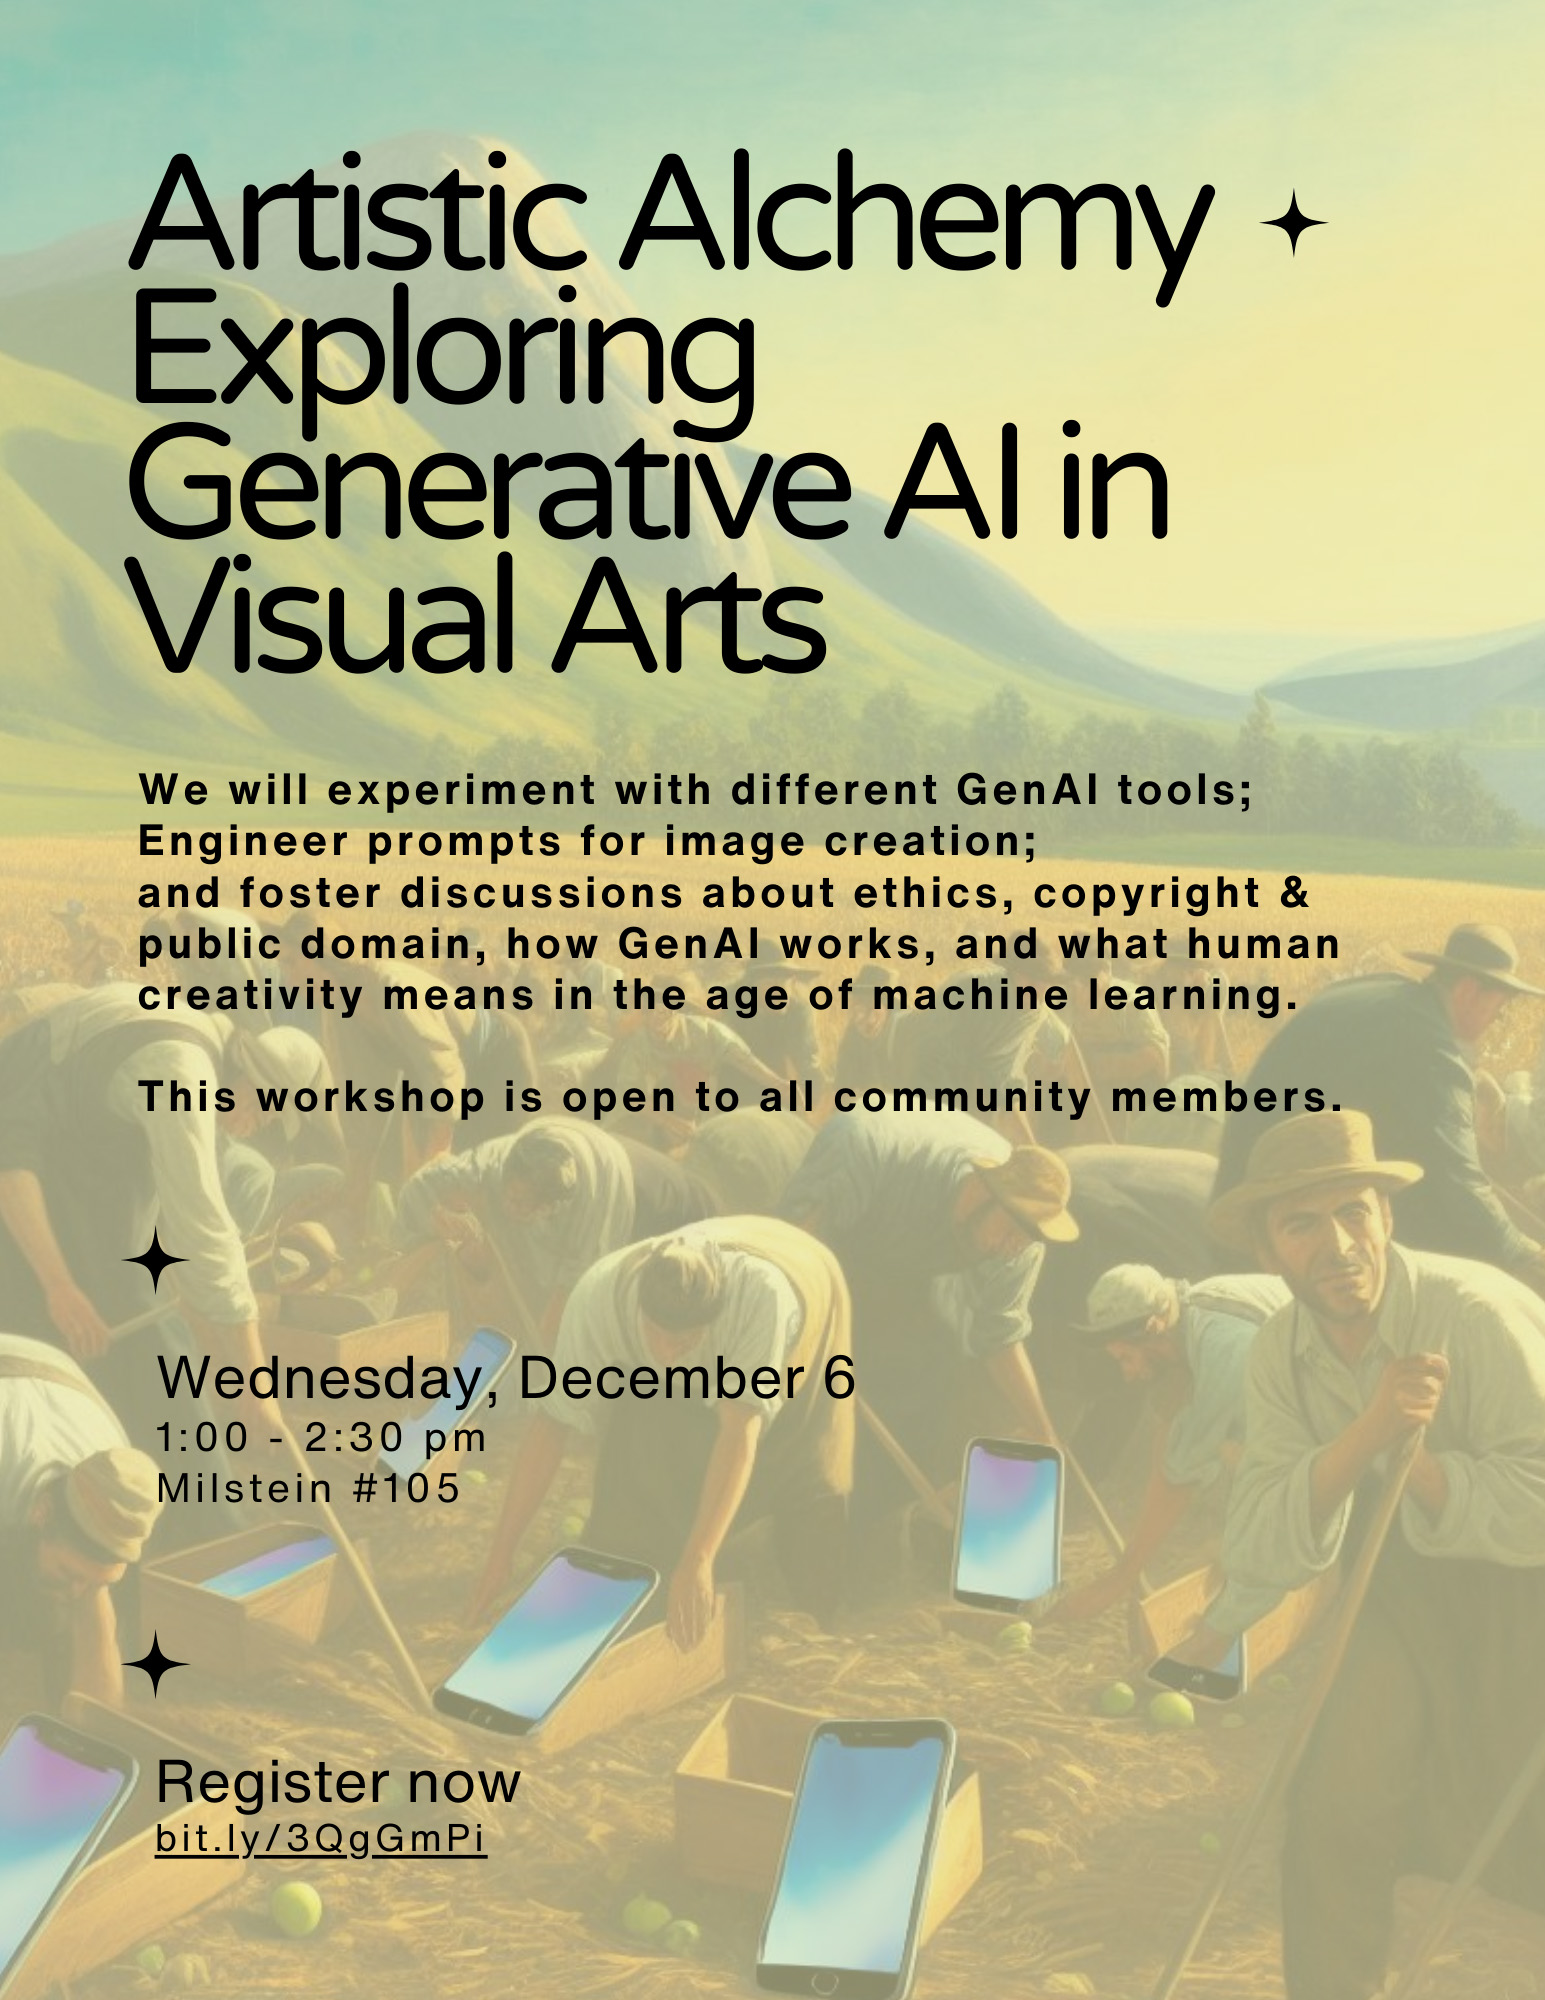 poster promoting the "Artistic Alchemy, Exploring Generative AI in Visual Arts" Event